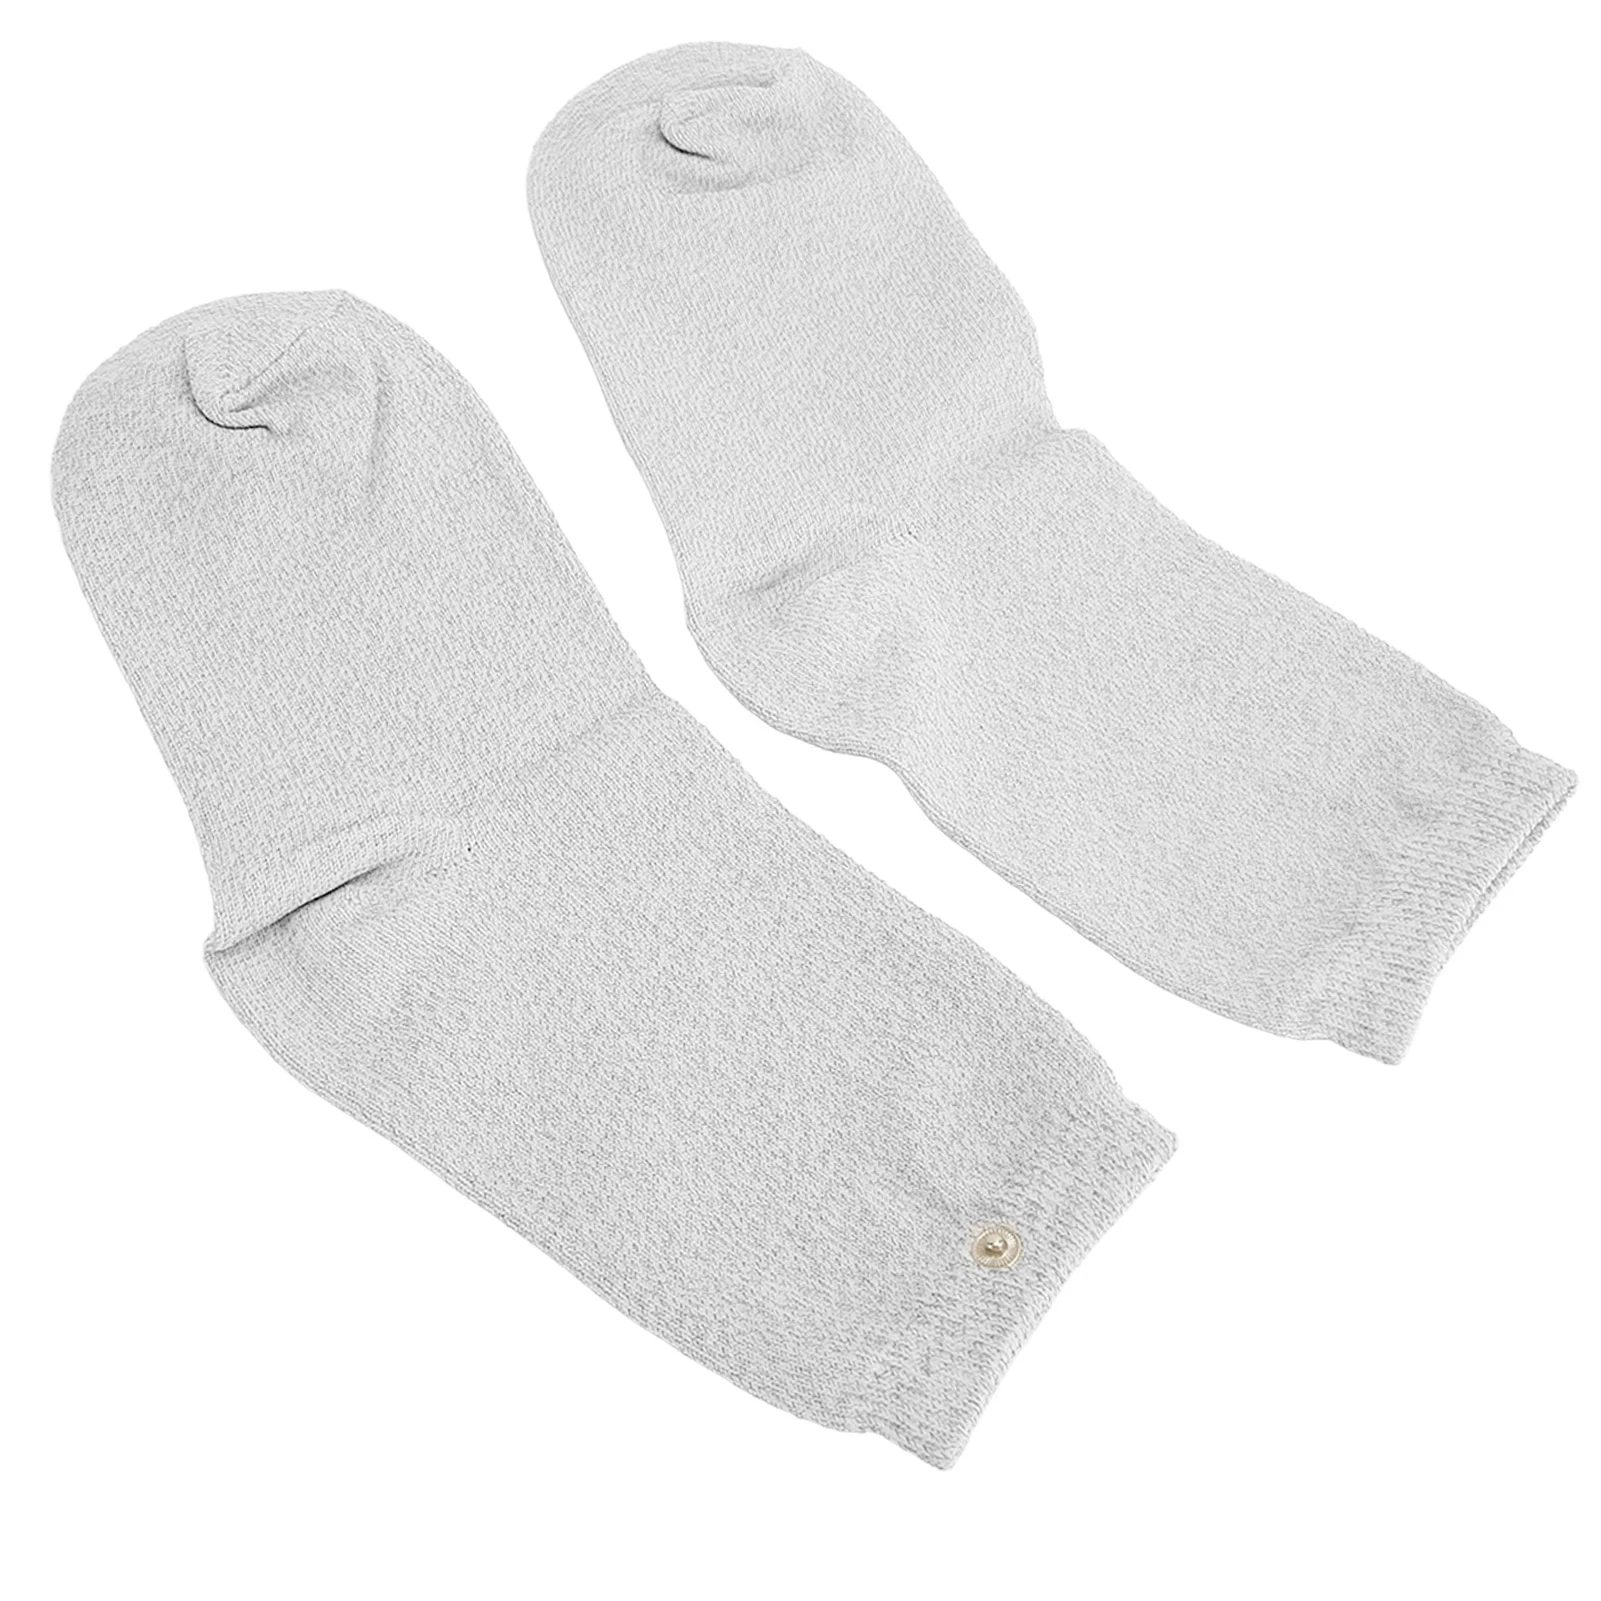 1 Pair of Conductive Socks Elastic Electric Therapy Silver Fiber Conductive Massage Electrode Socks for Arthritis